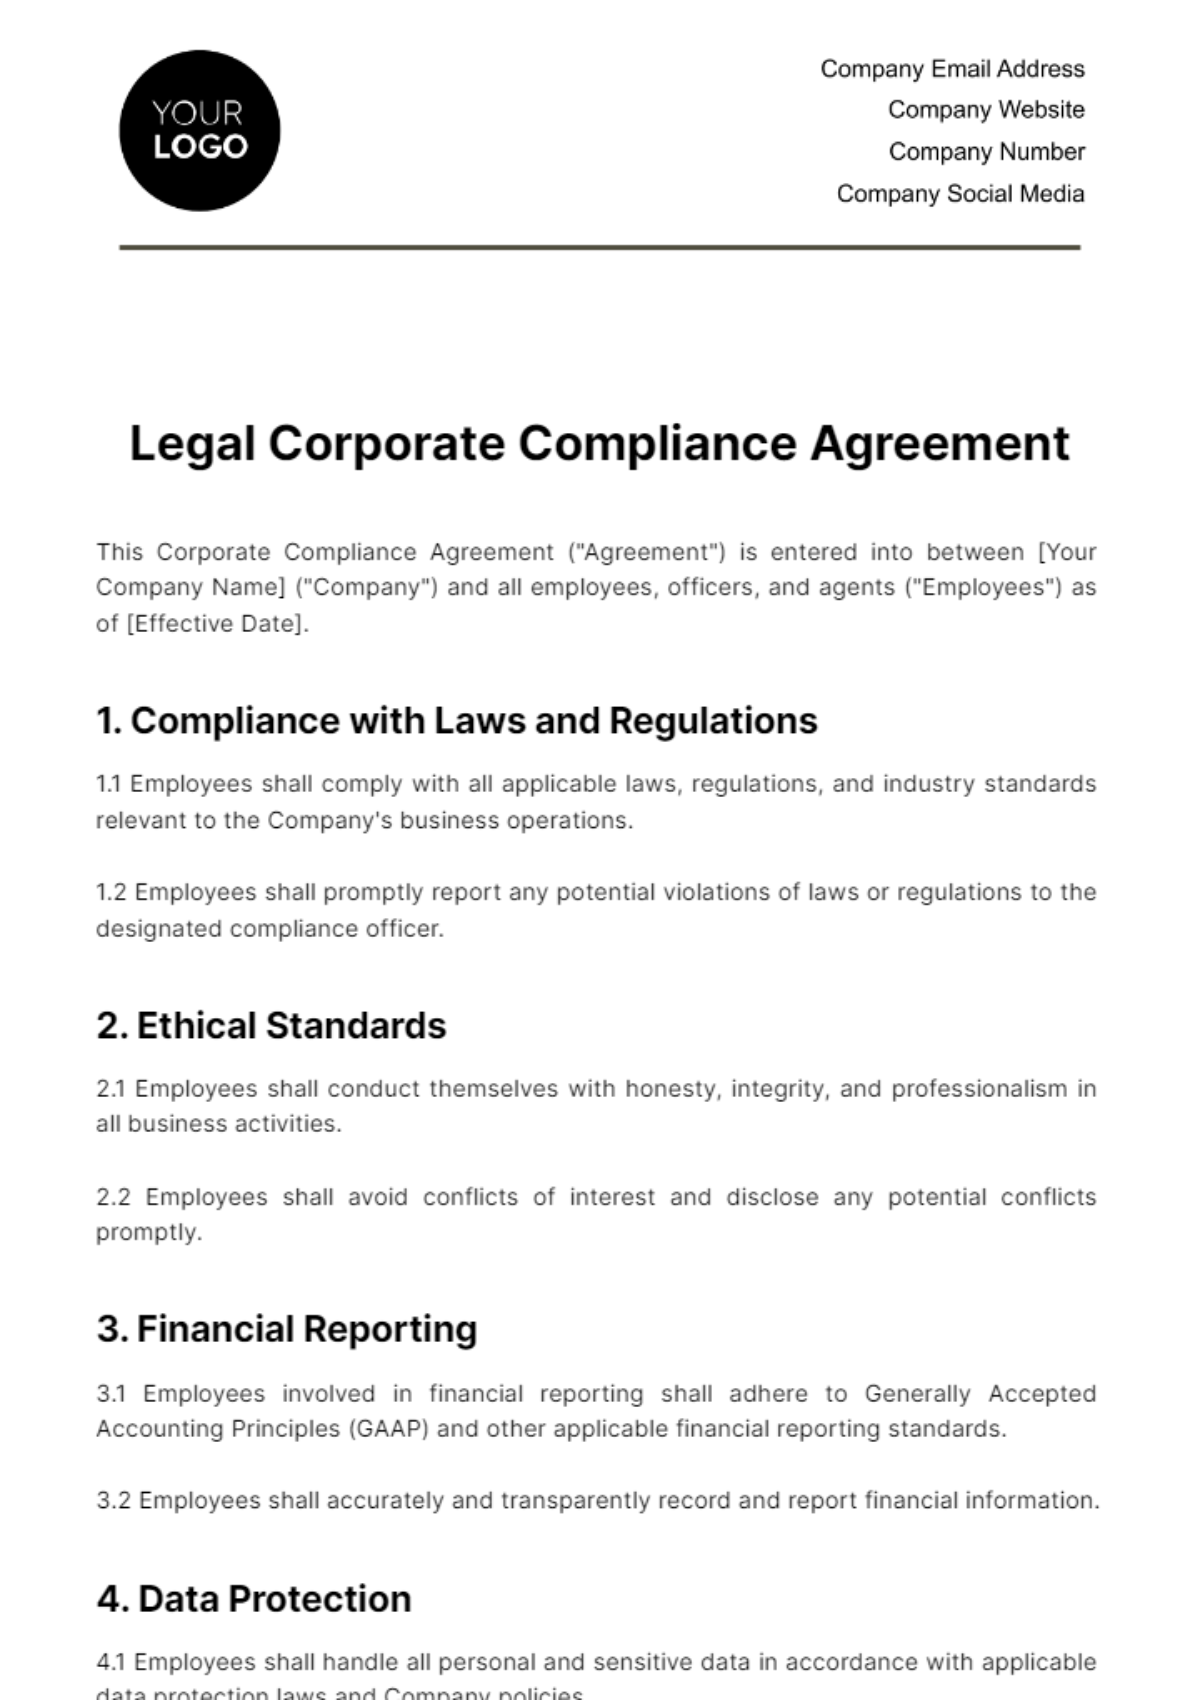   Legal Corporate Compliance Agreement Template